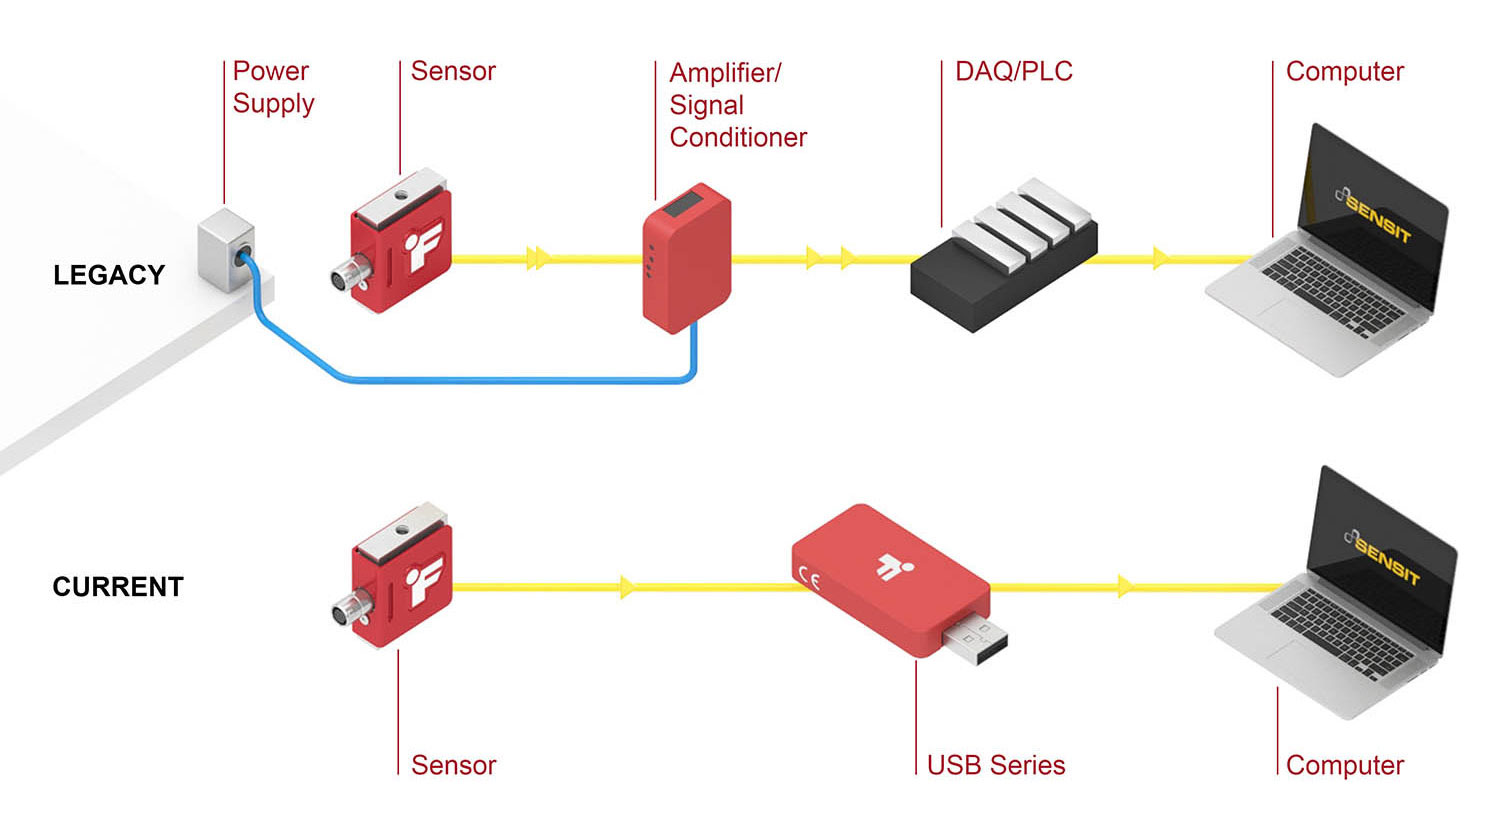 System diagram showing a legacy sensor solution where the sensor is connected to power and an amplifier/signal conditioner, connected to a DAQ/PLC, connected to a computer. Compare that to a system where the sensor is connected to a USB Series instrument that connects directly to the computer.